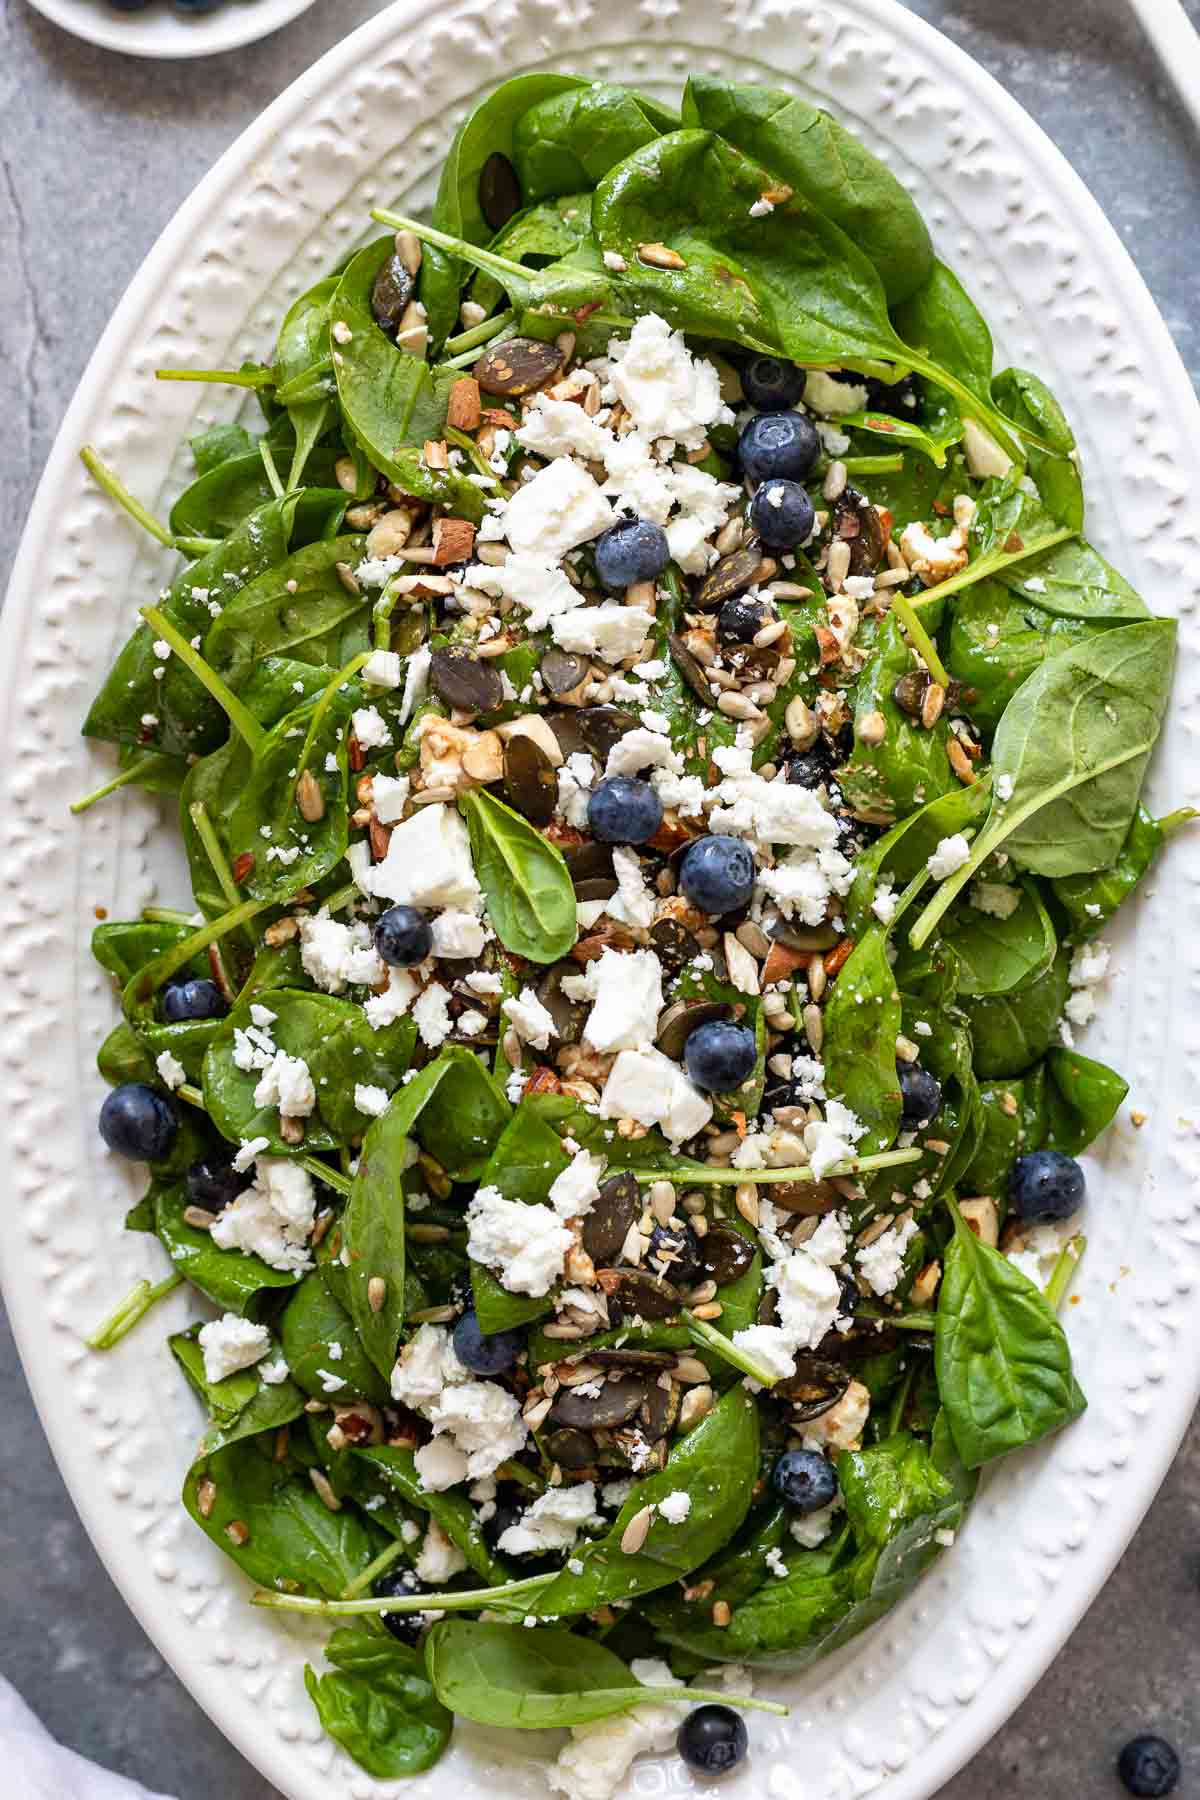 Blueberry Spinach Salad with Feta recipe